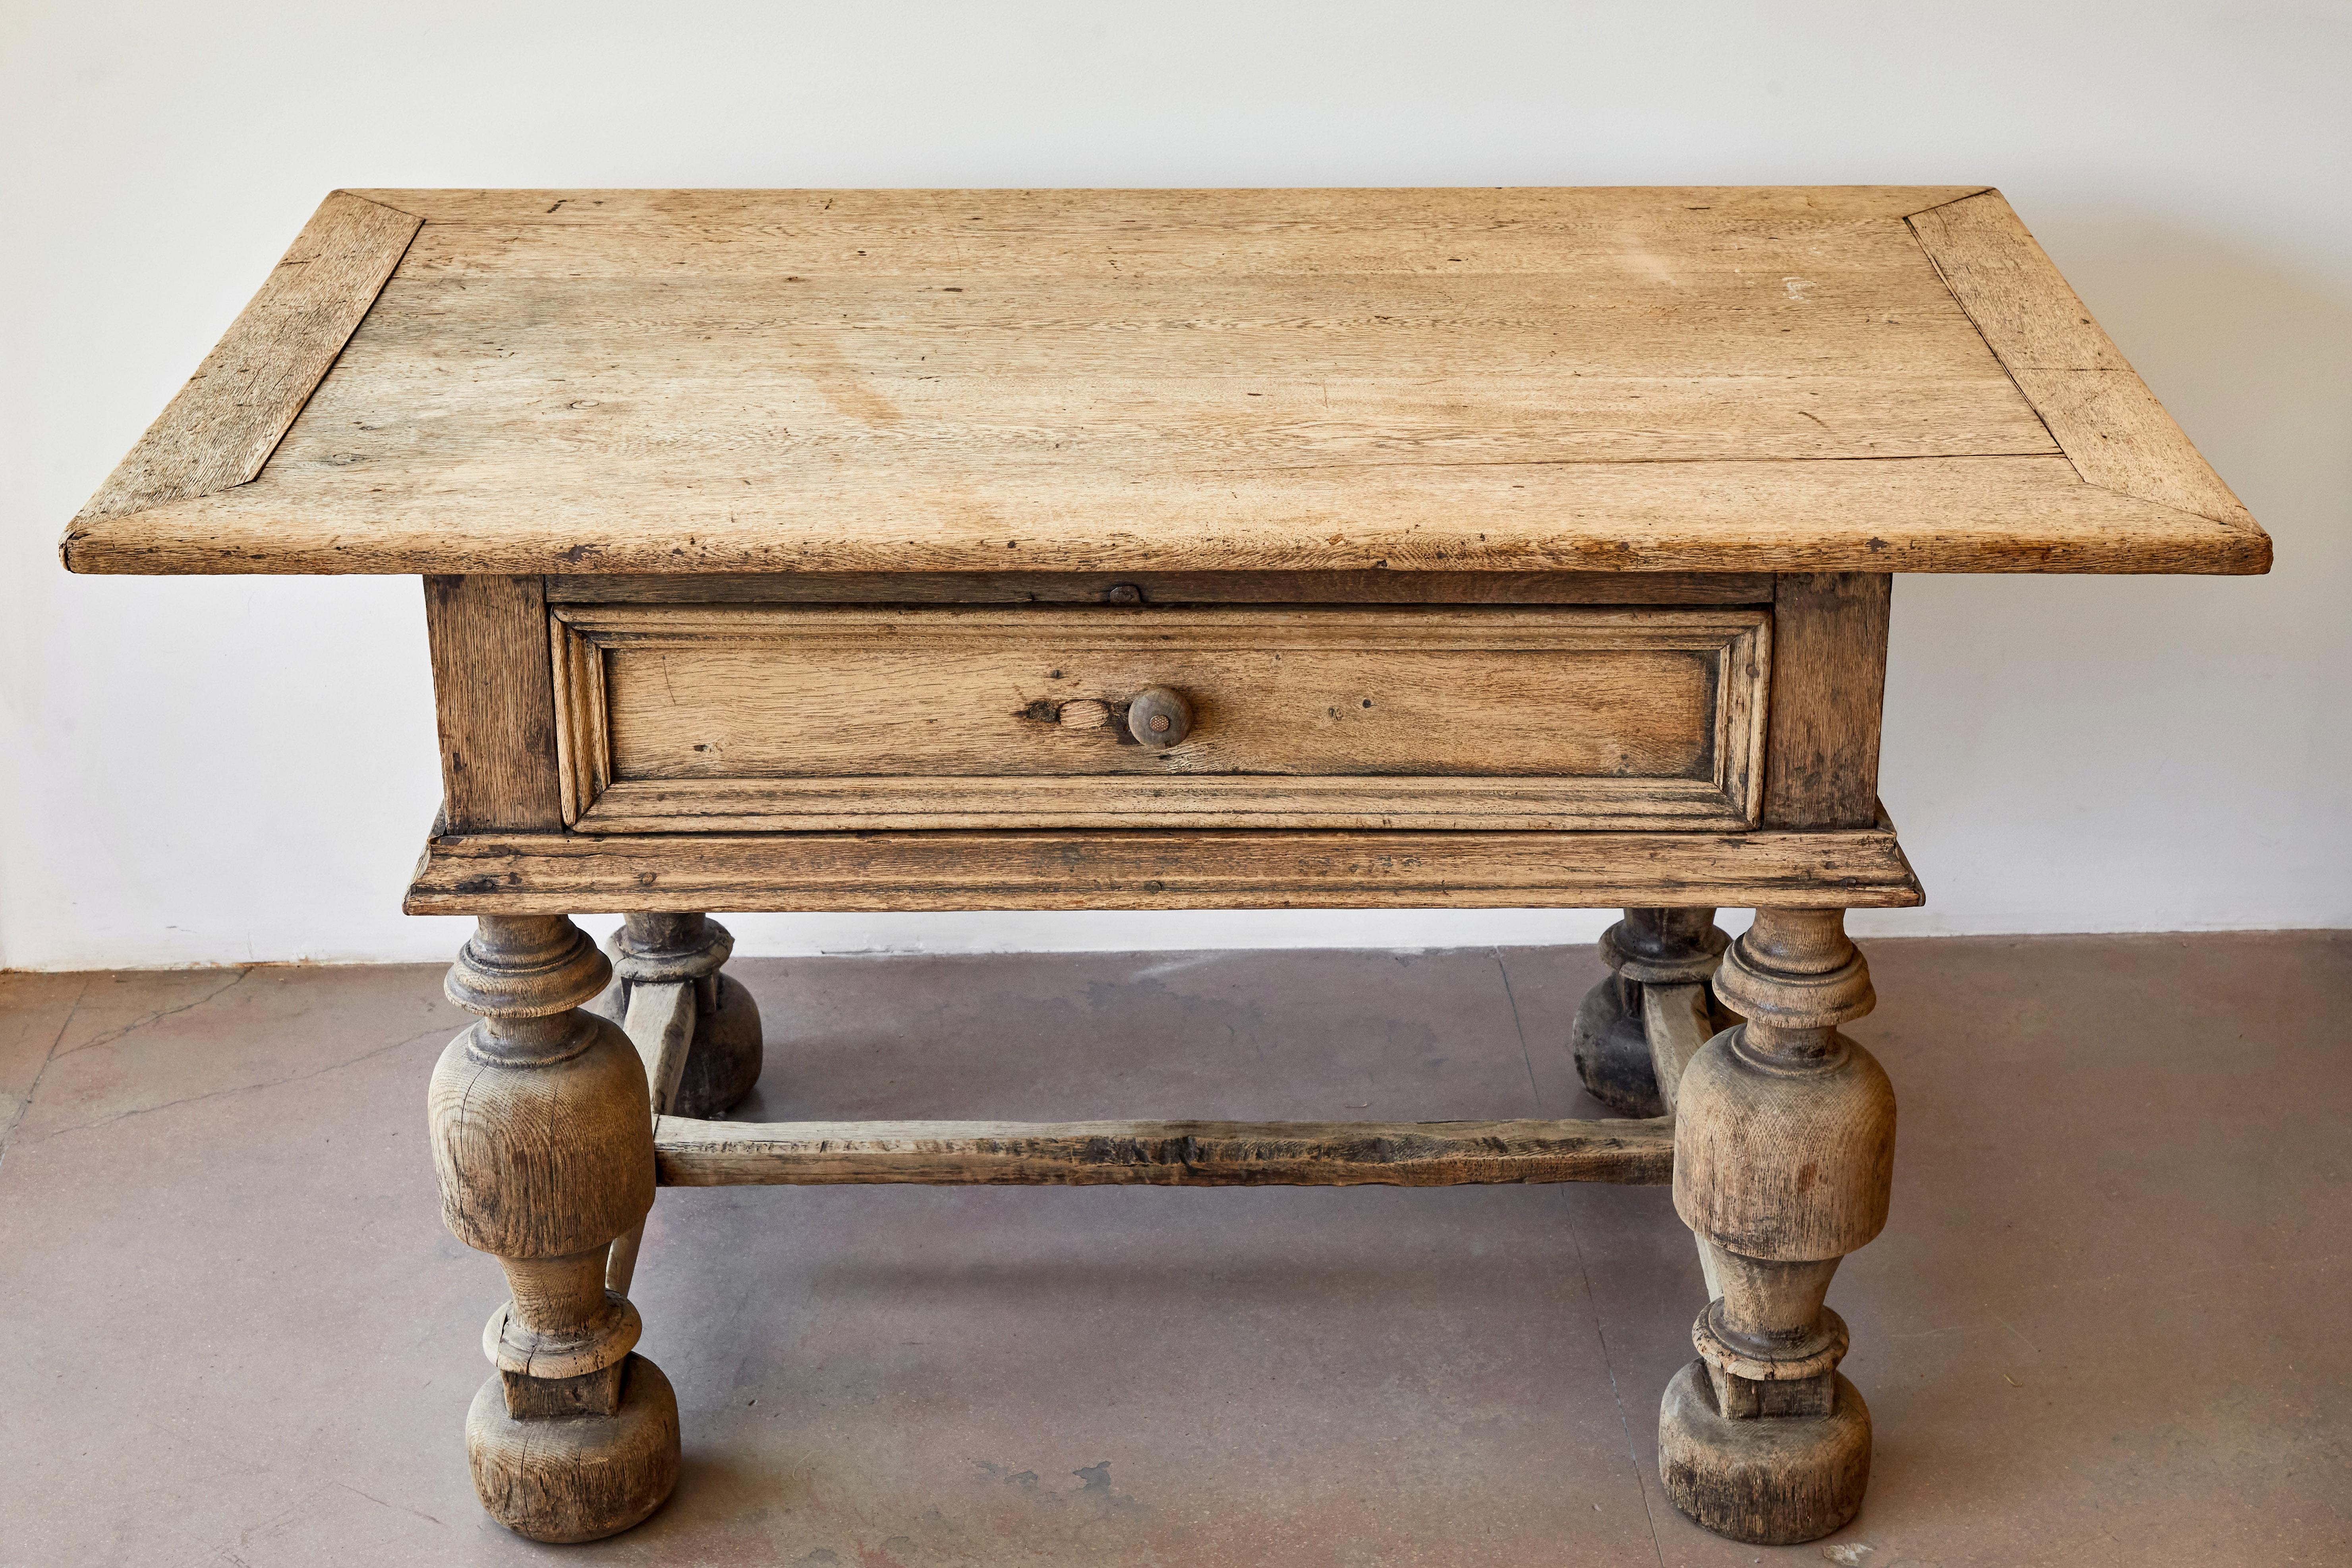 Swedish Baroque wood table/desk with turned legs. Made in Sweden, circa 19th century.